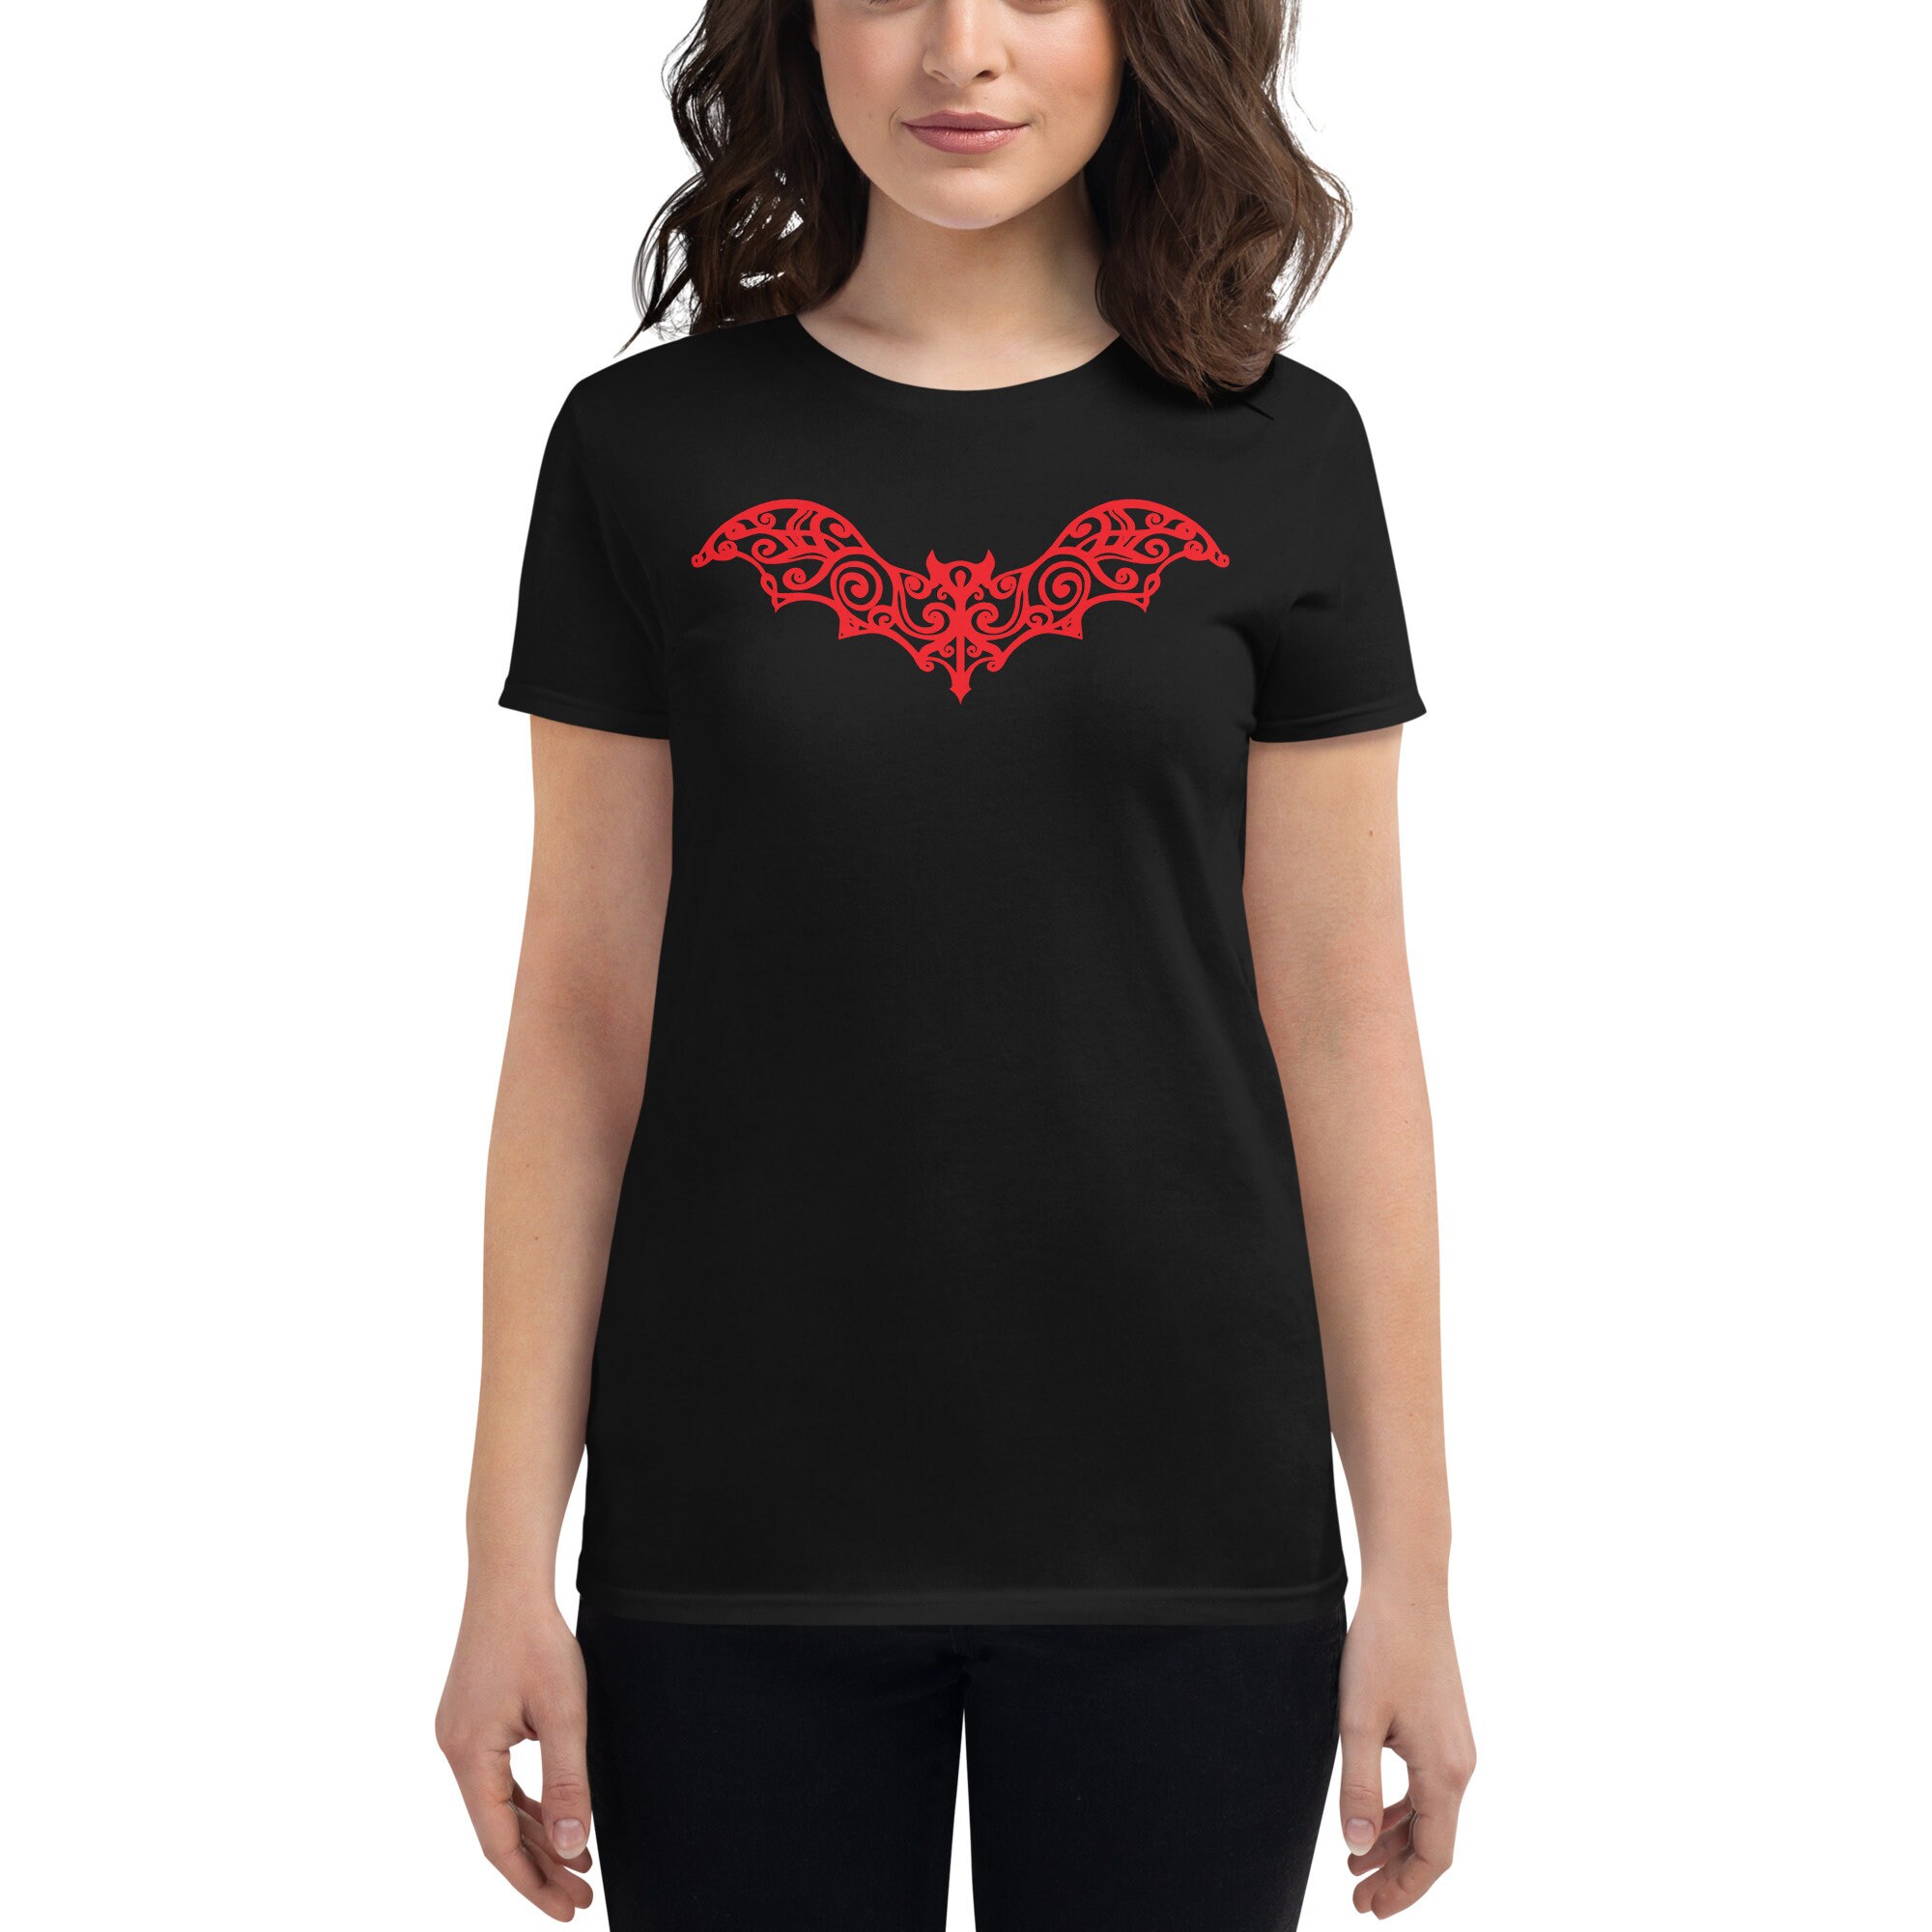 Discover Red Gothic Wrought Iron Style Vine Bat Women's Short Sleeve Babydoll T-shirt